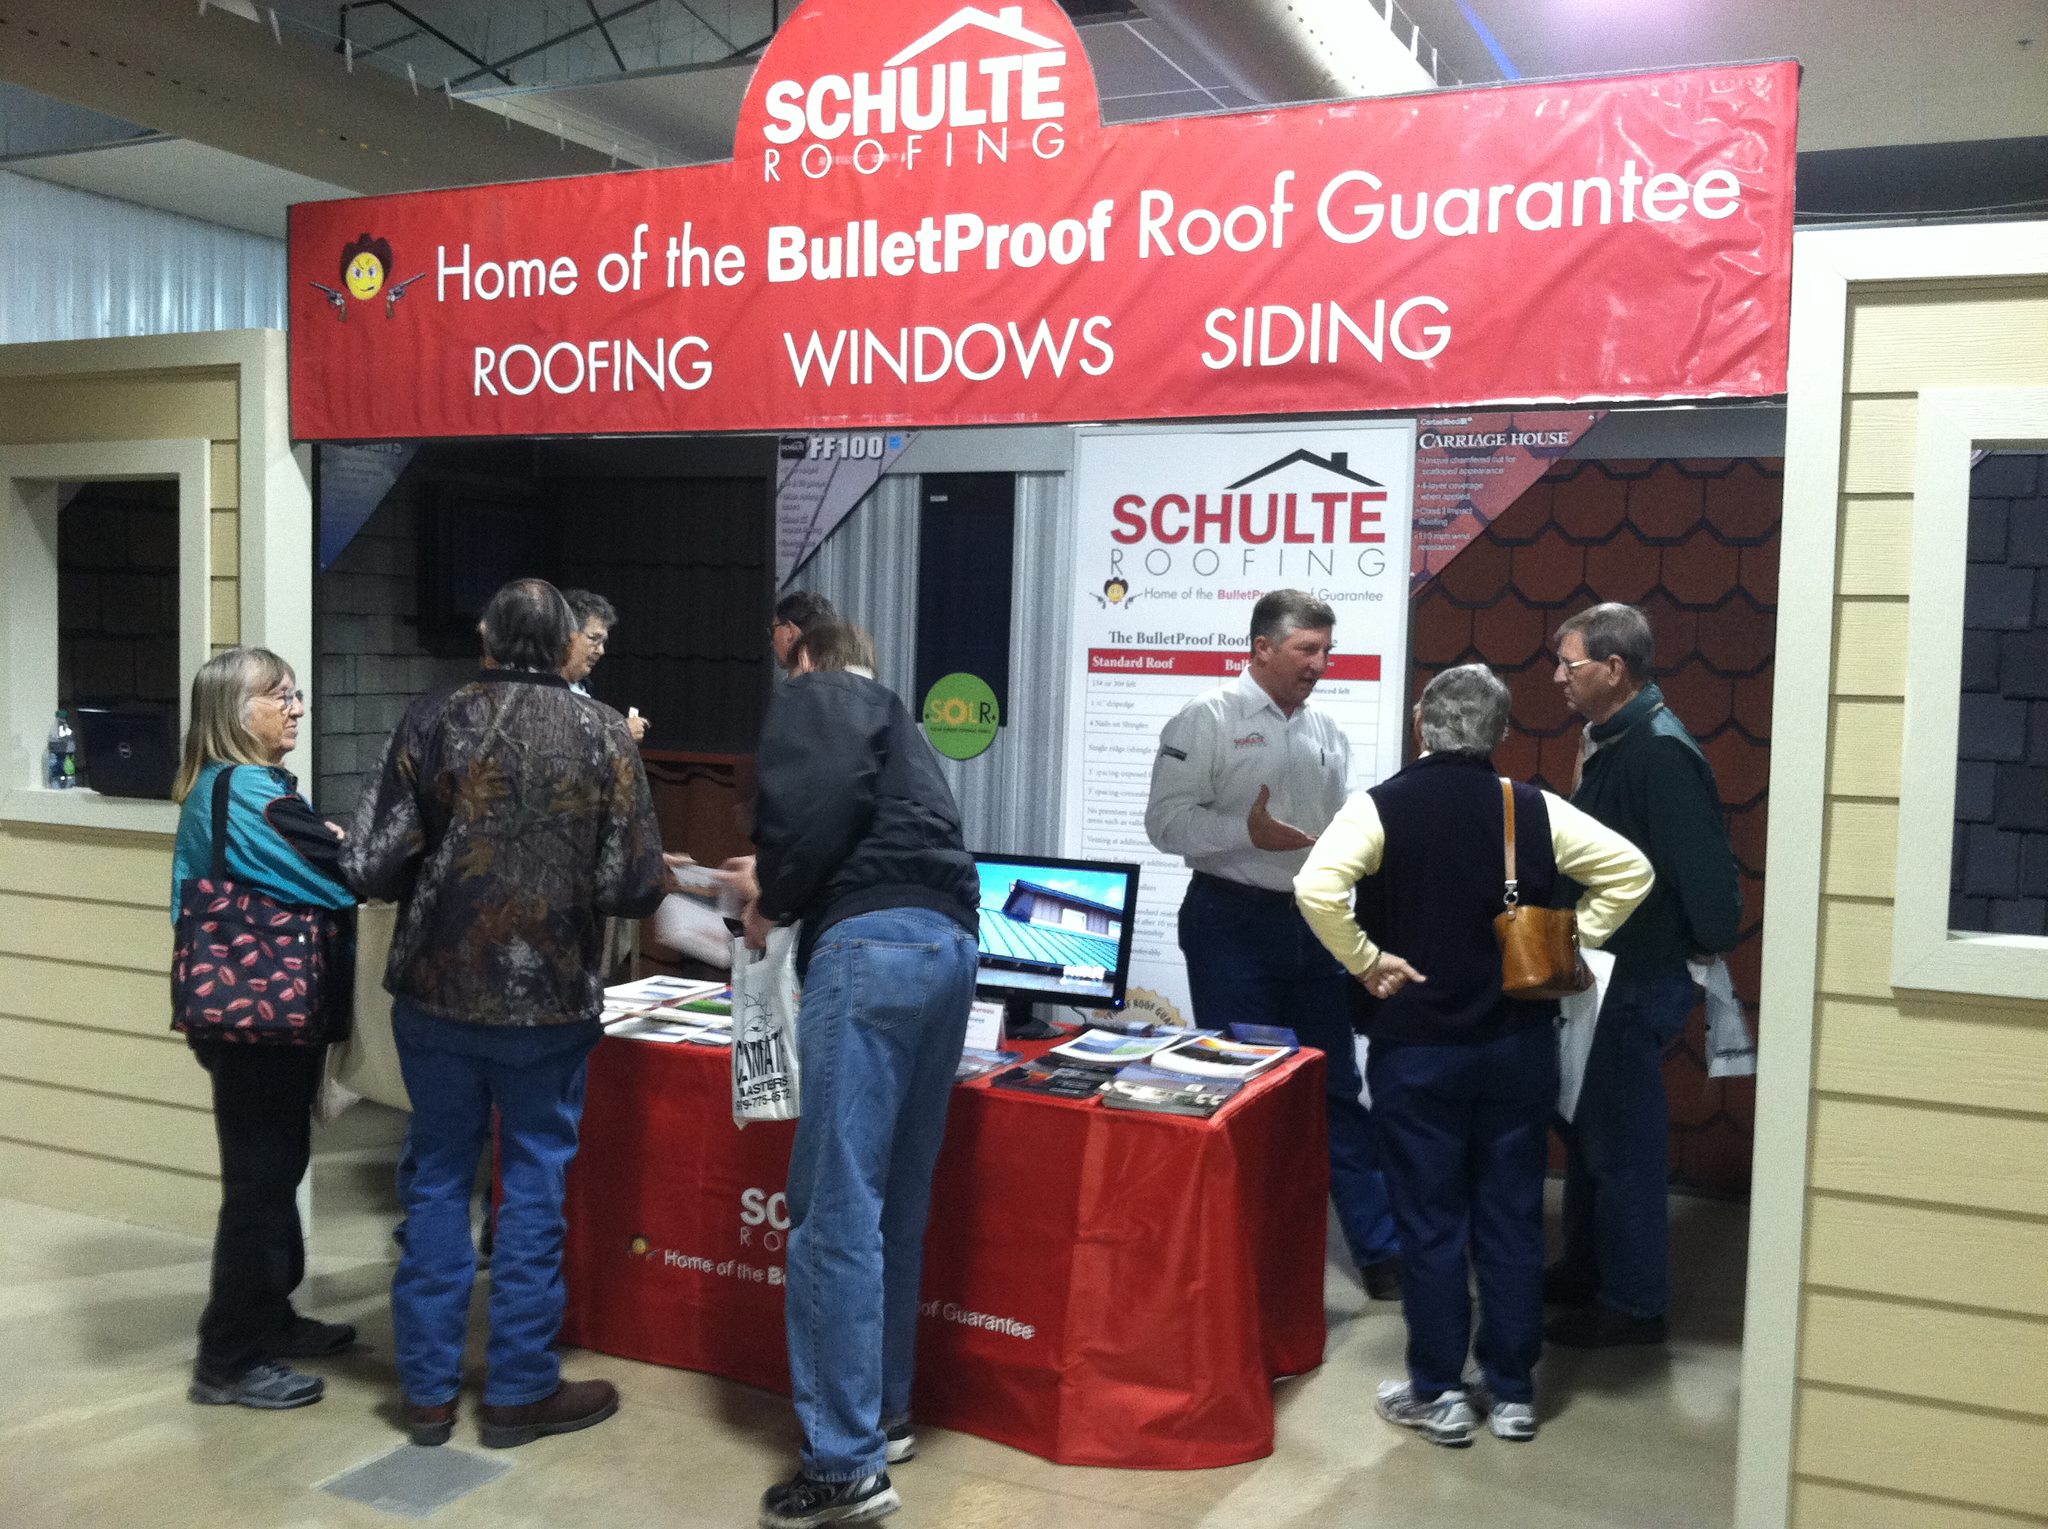 Schulte Roofing at the BCS Home and Garden Expo